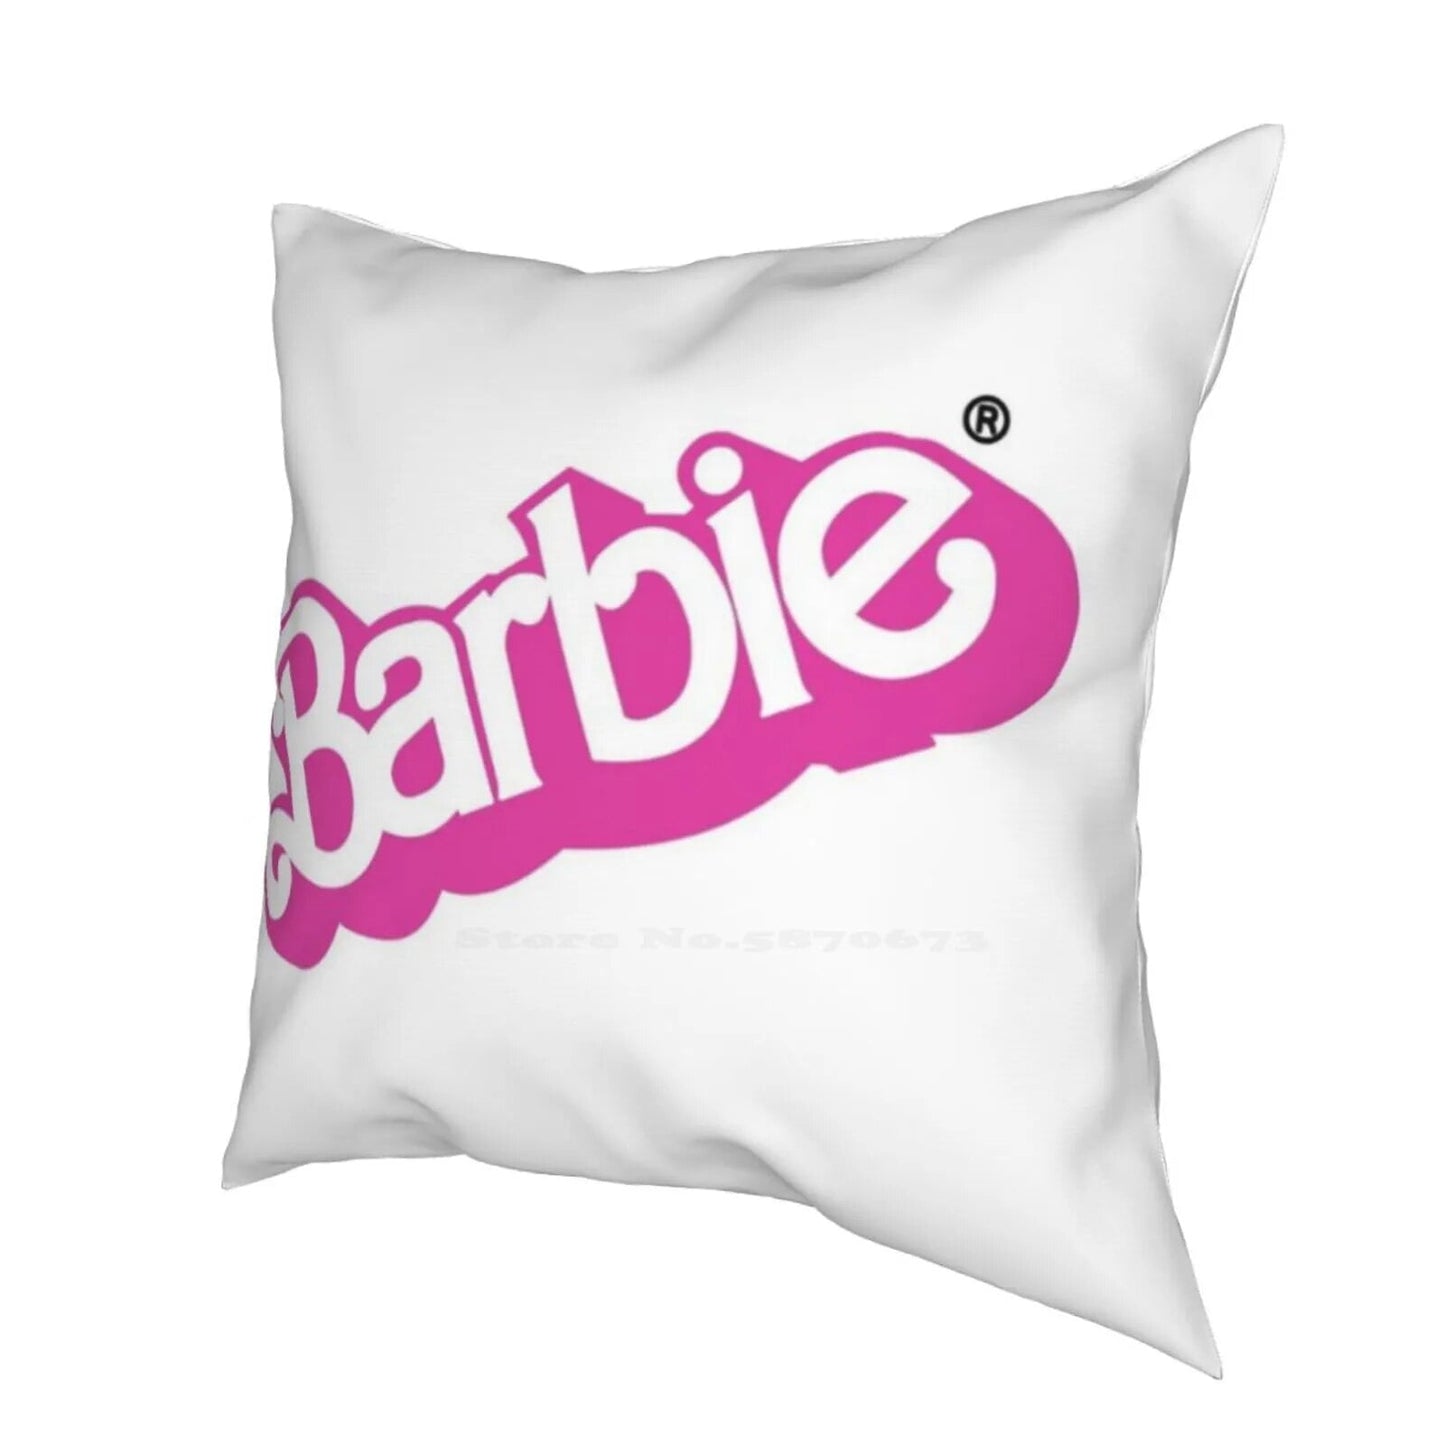 Classic Logo Funny Cute Decor Square Pillow Cover Retro Classic Pink (Not Include the Pillow)